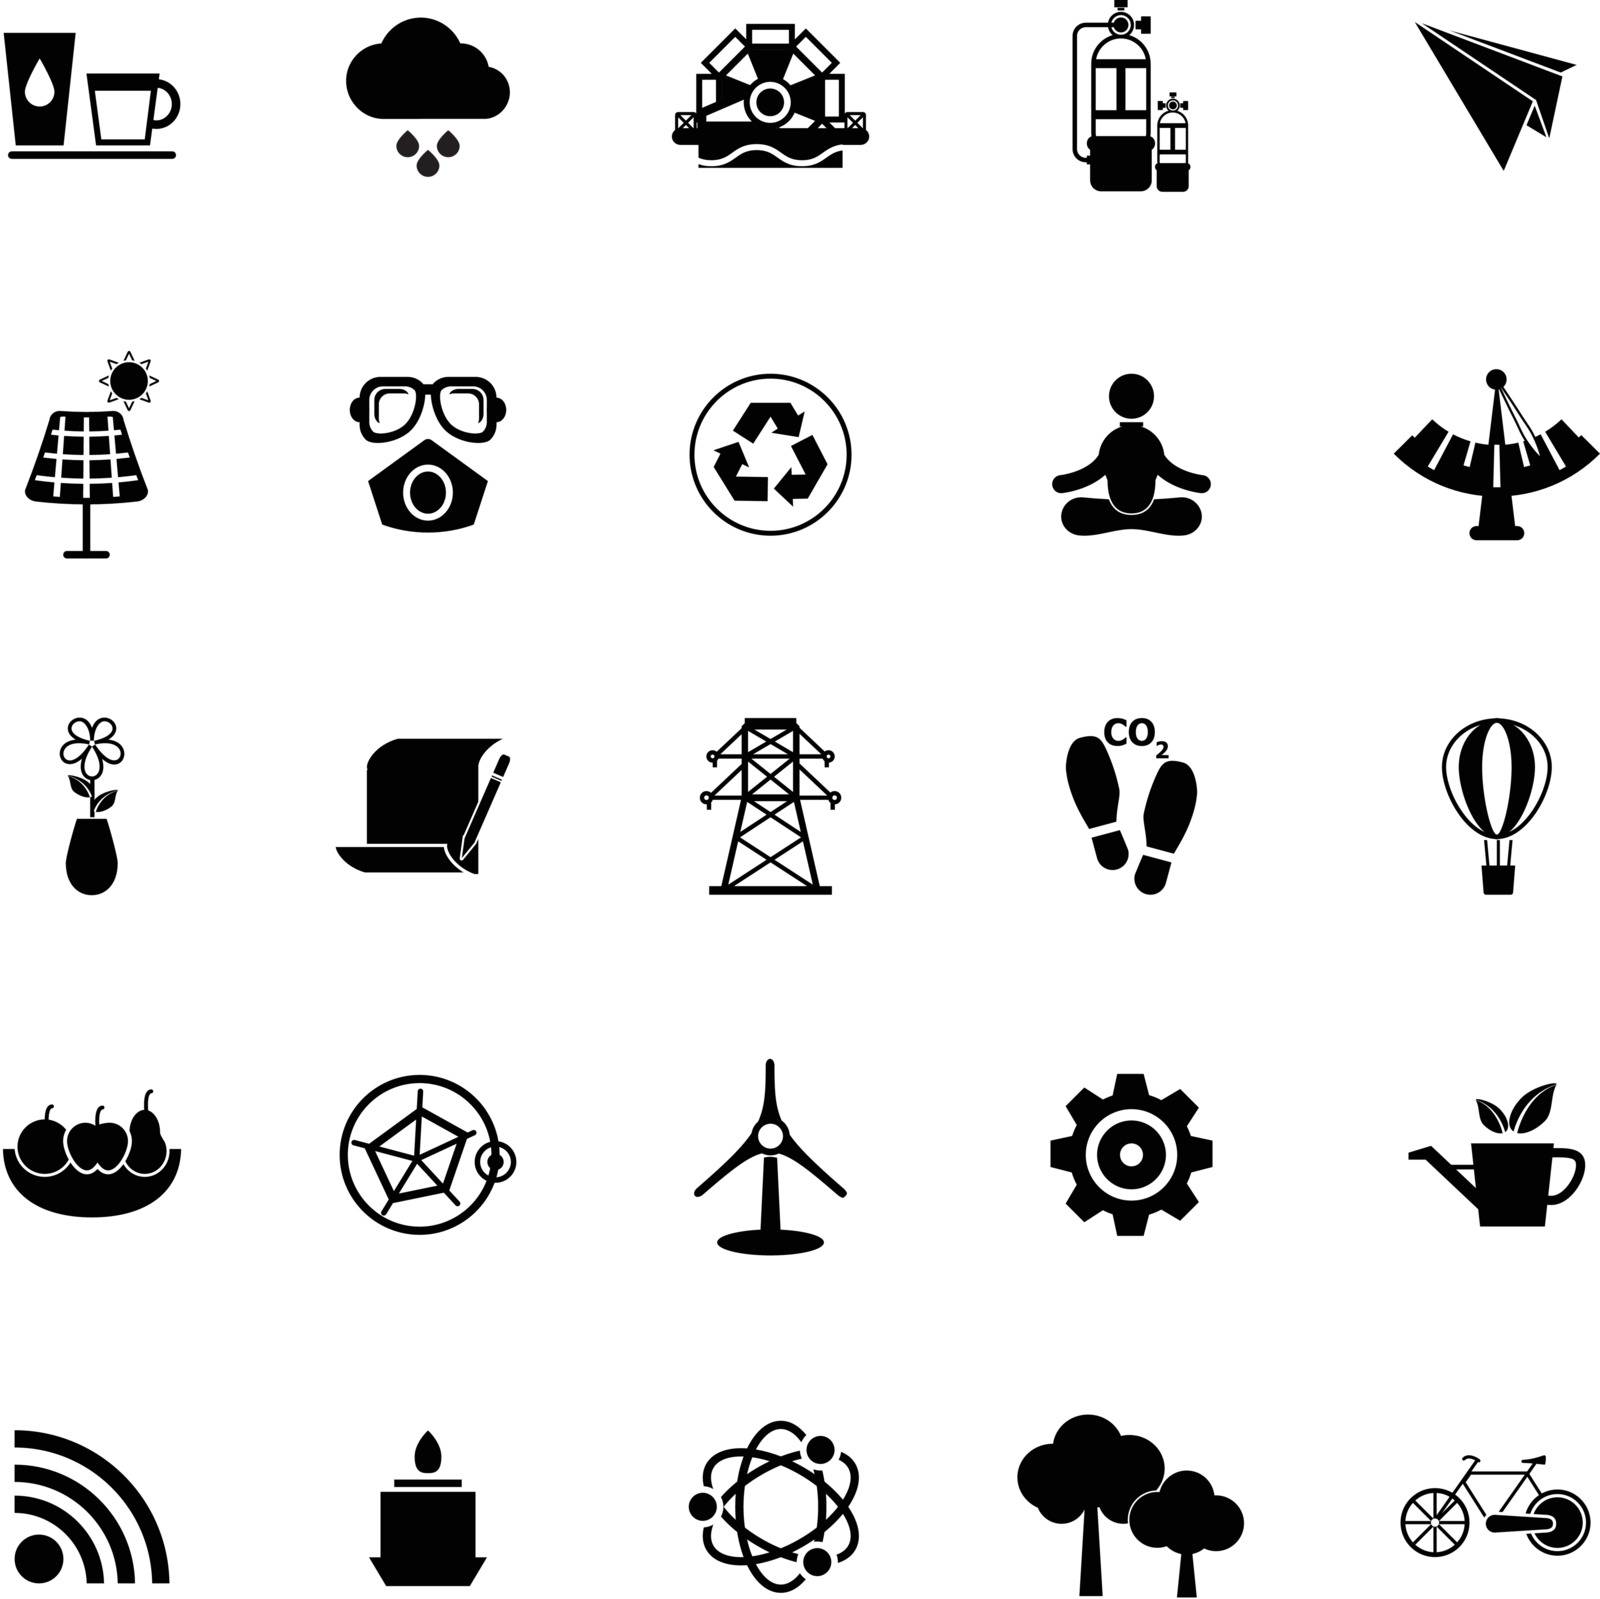 Clean concept icons on white background by nalinratphi